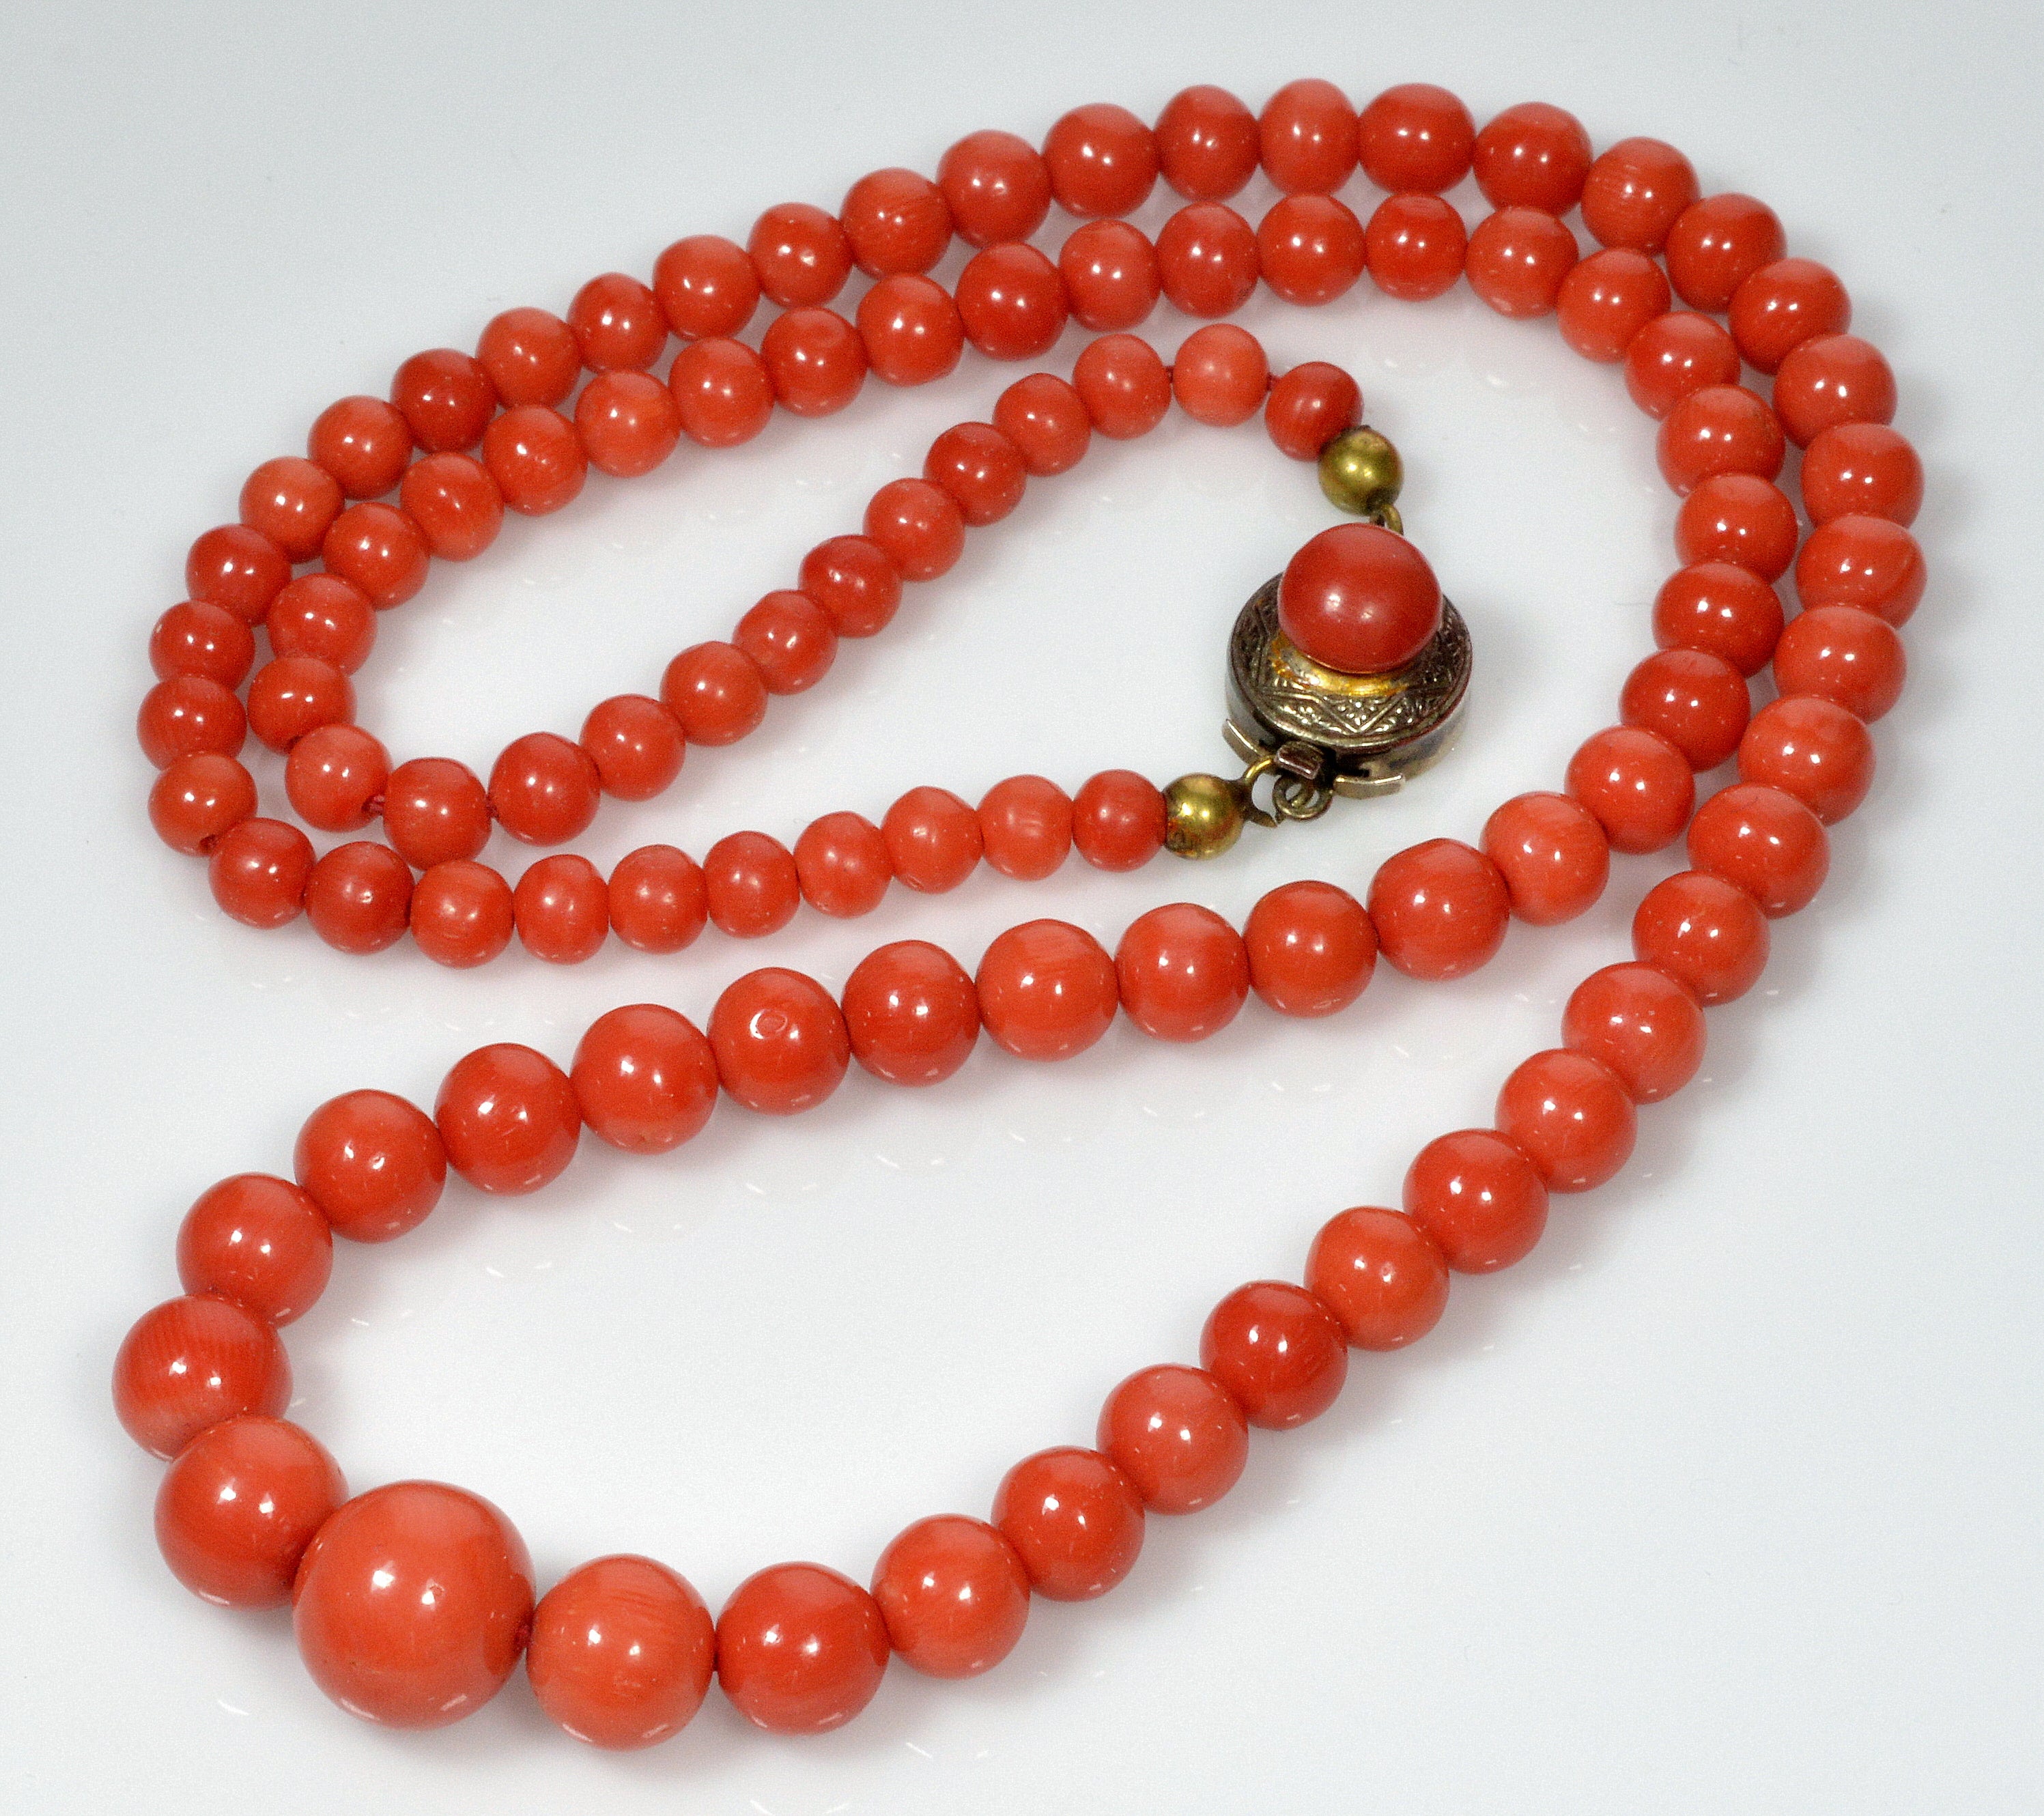 Exquisite vintage Chinese red coral necklace